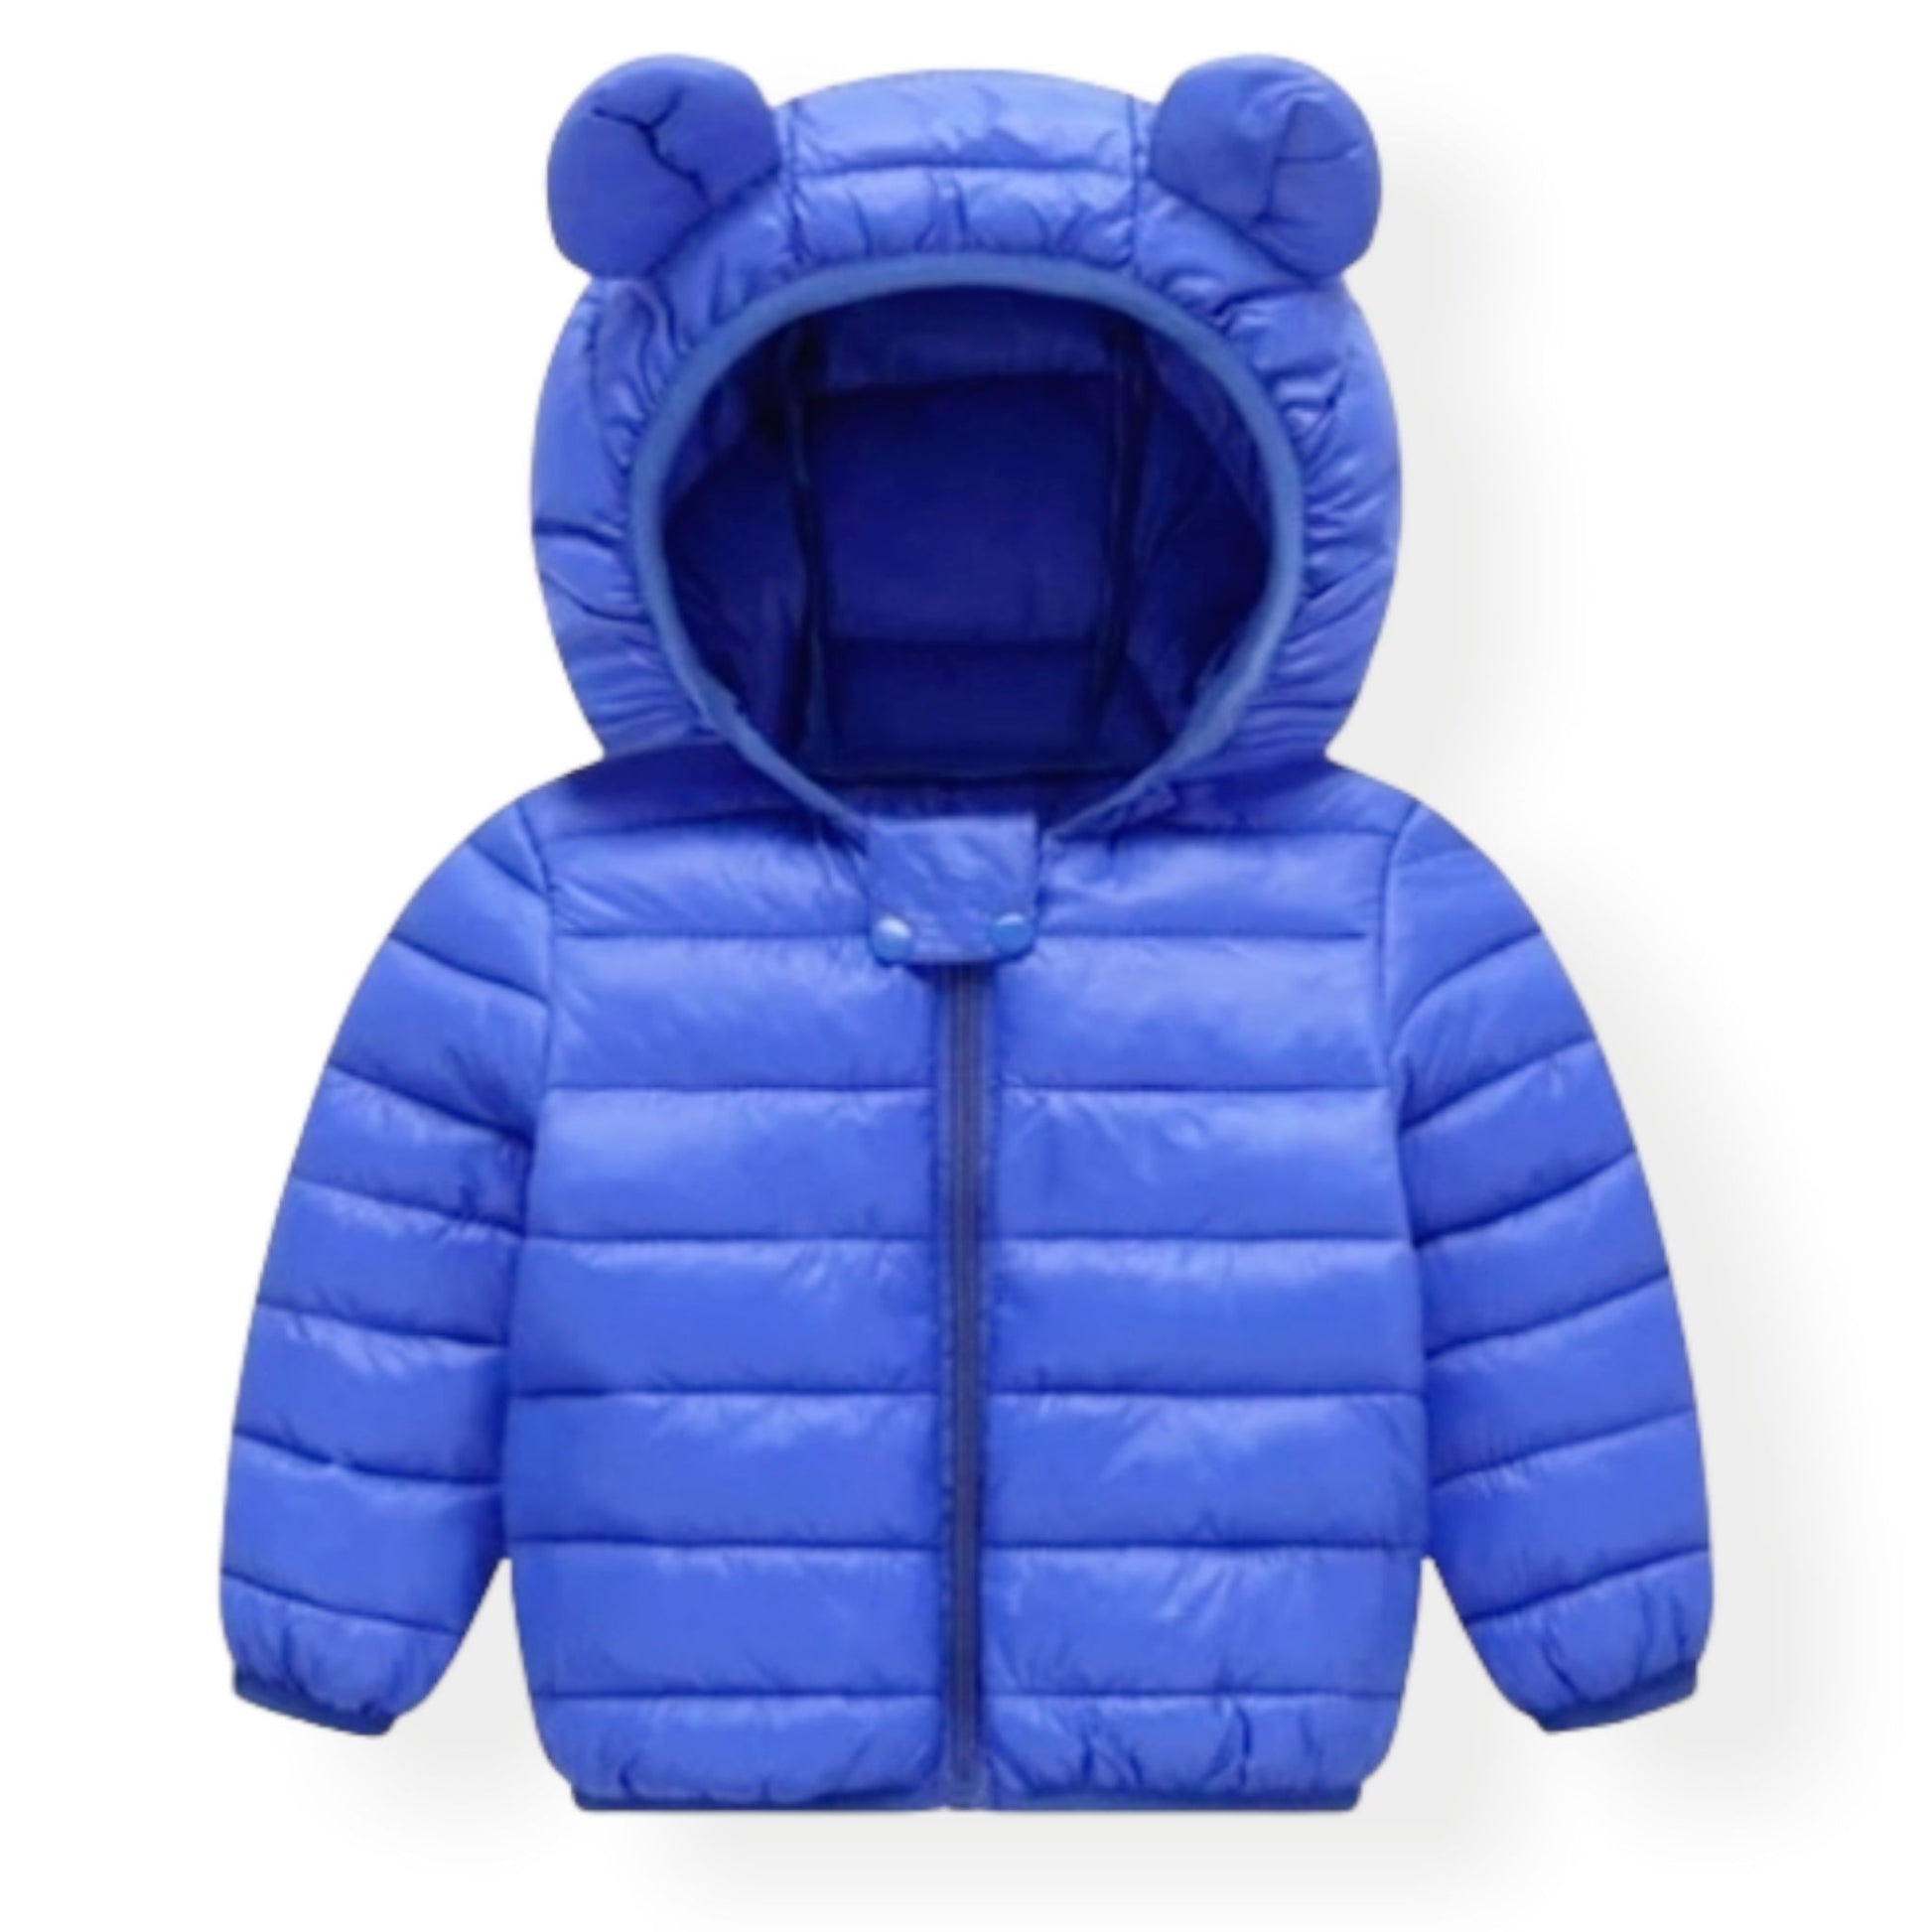 blue winter puffer jacket with ears- hunny bubba kids